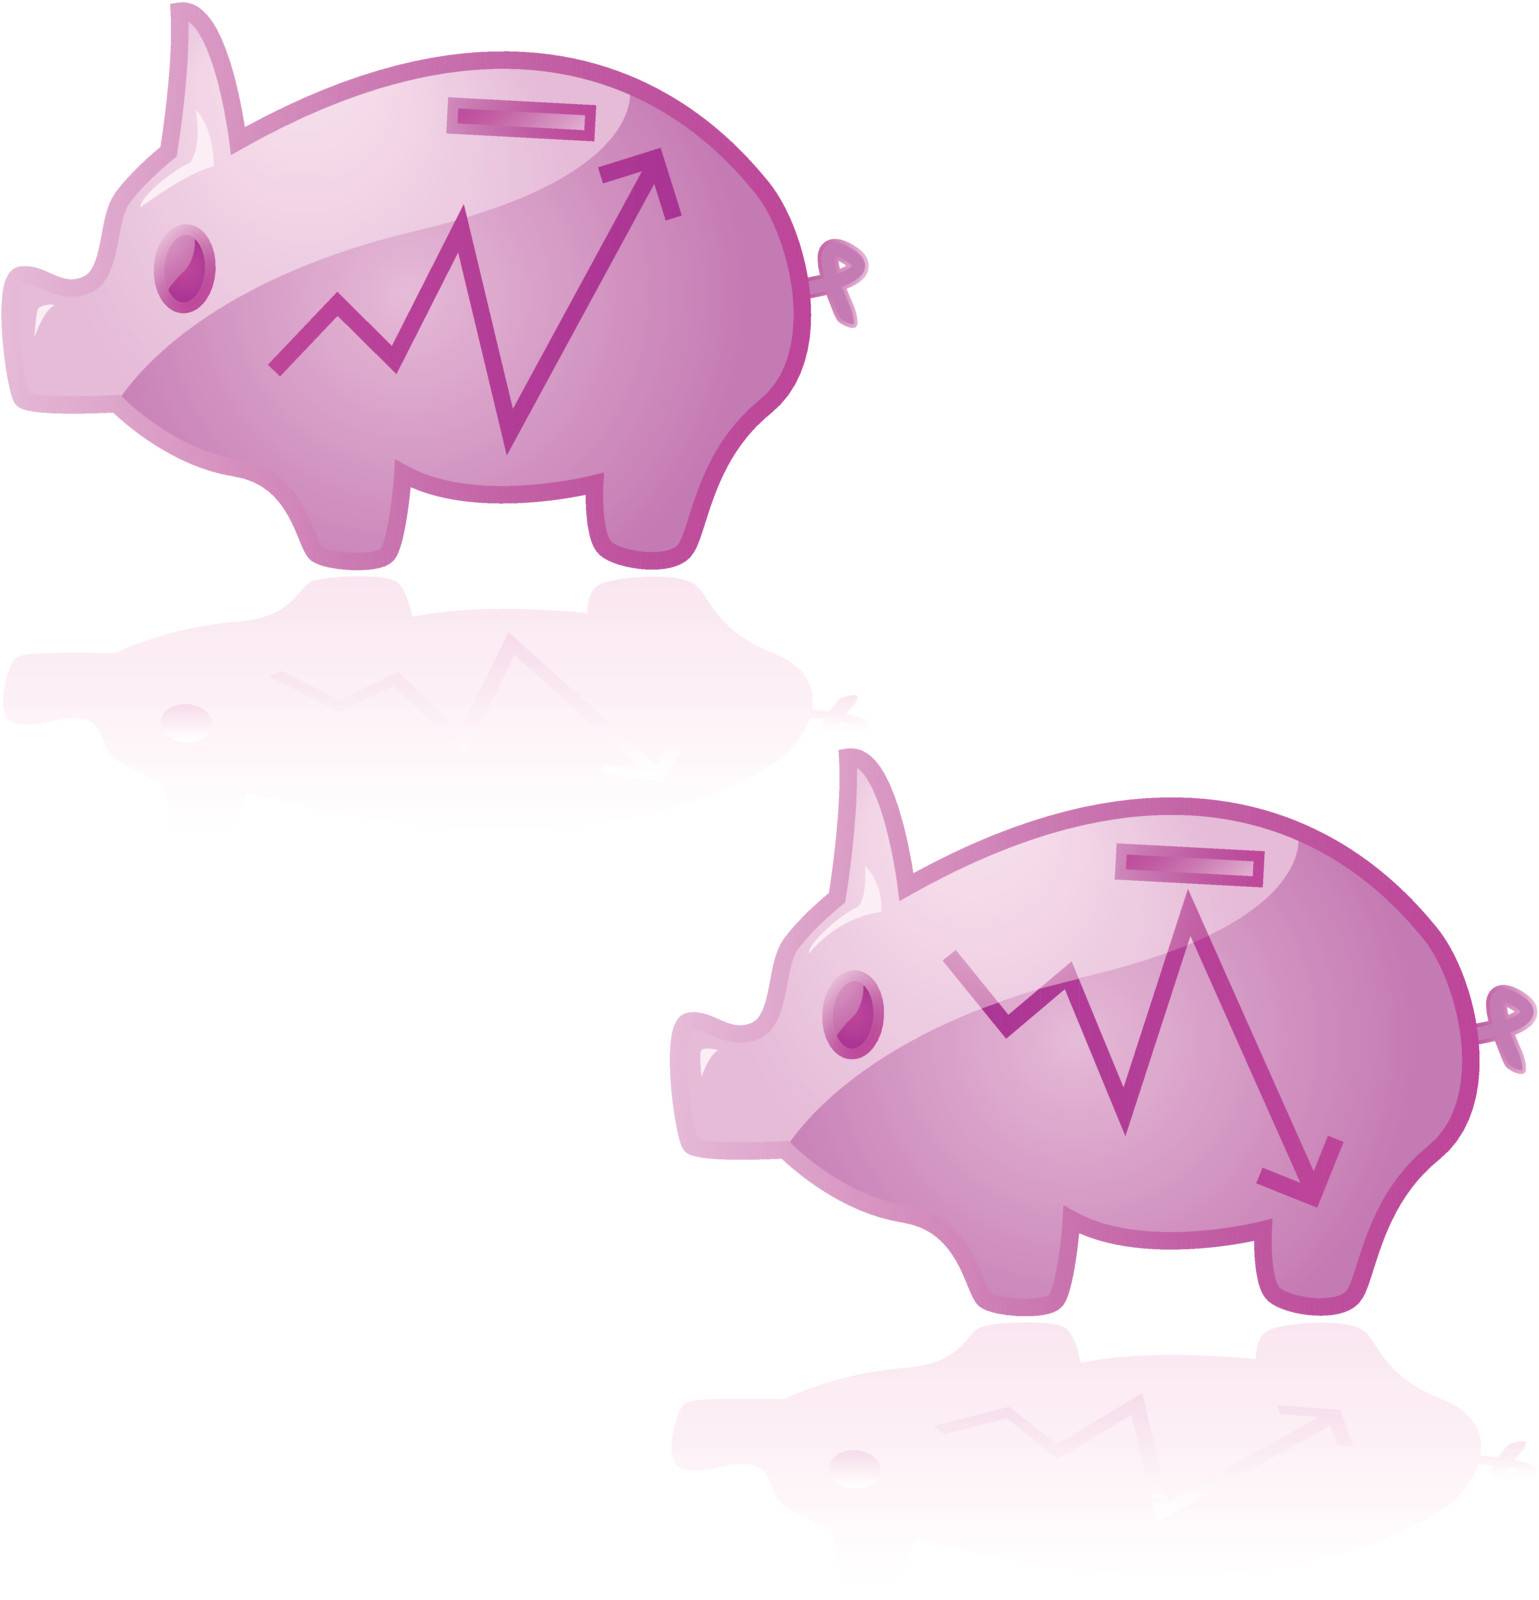 Glossy illustration of a piggy bank reflecting the ups and downs of the market